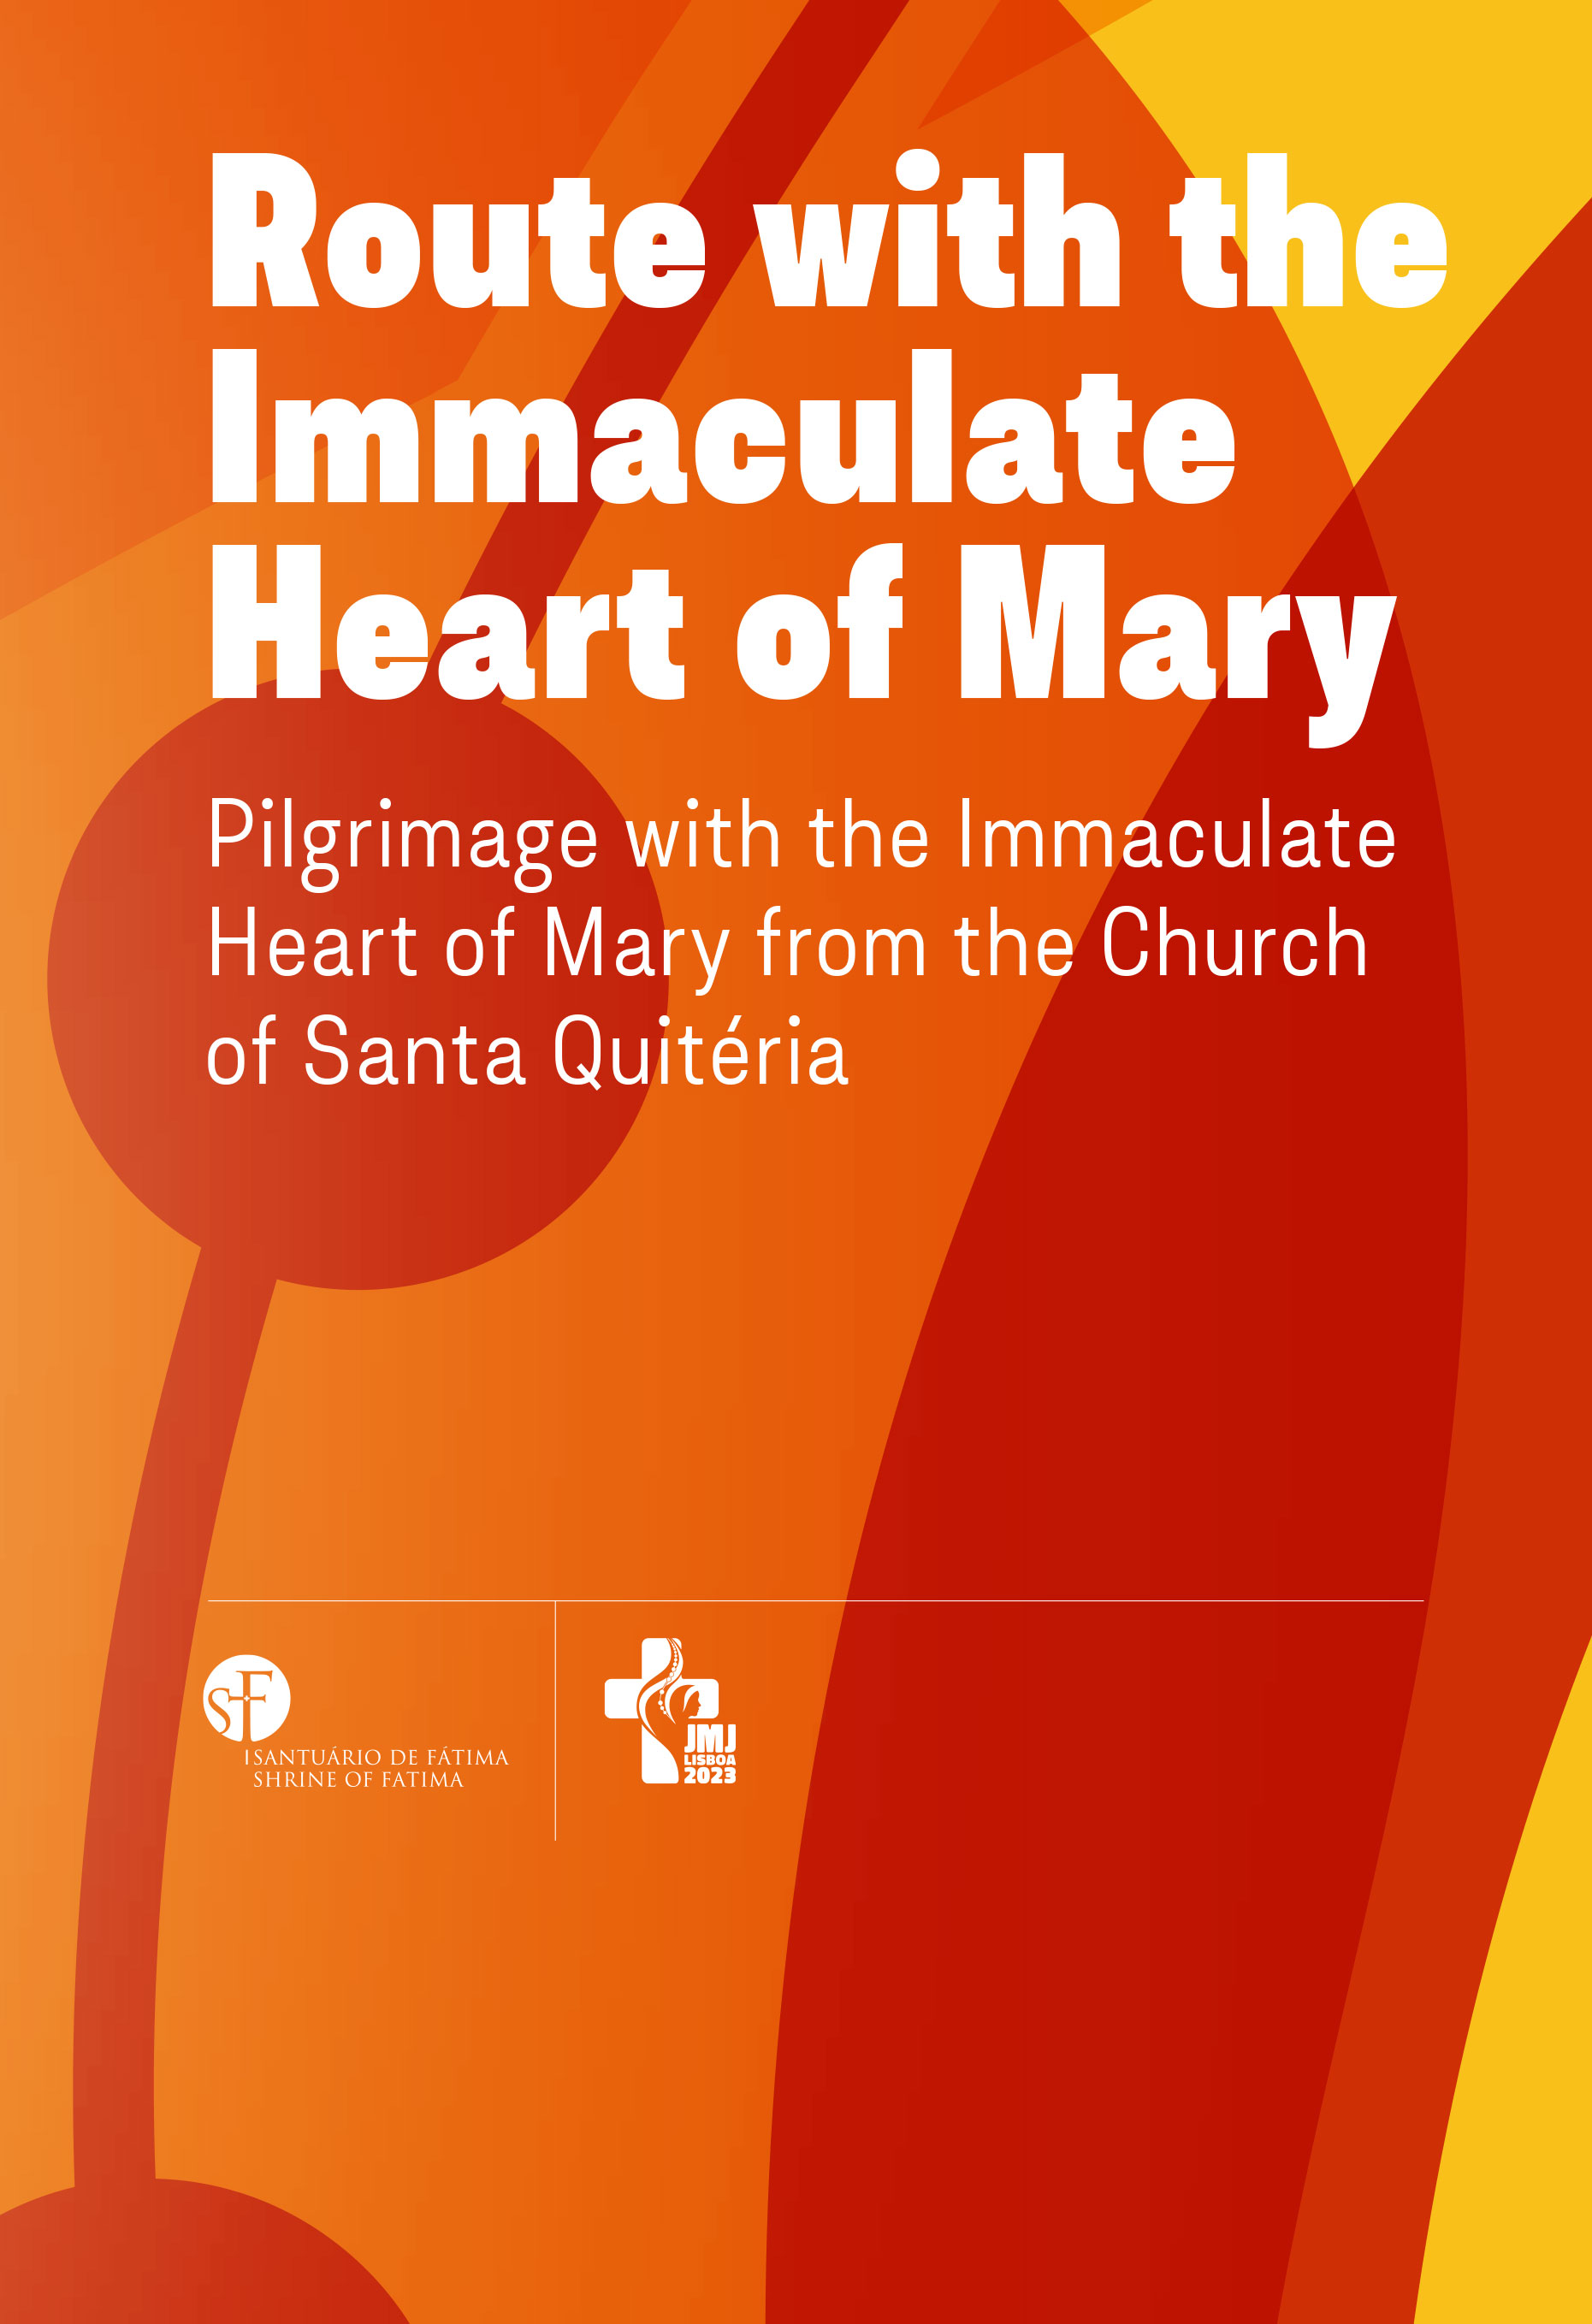 5-route-with-the-immaculate-heart-of-mary-1.jpg